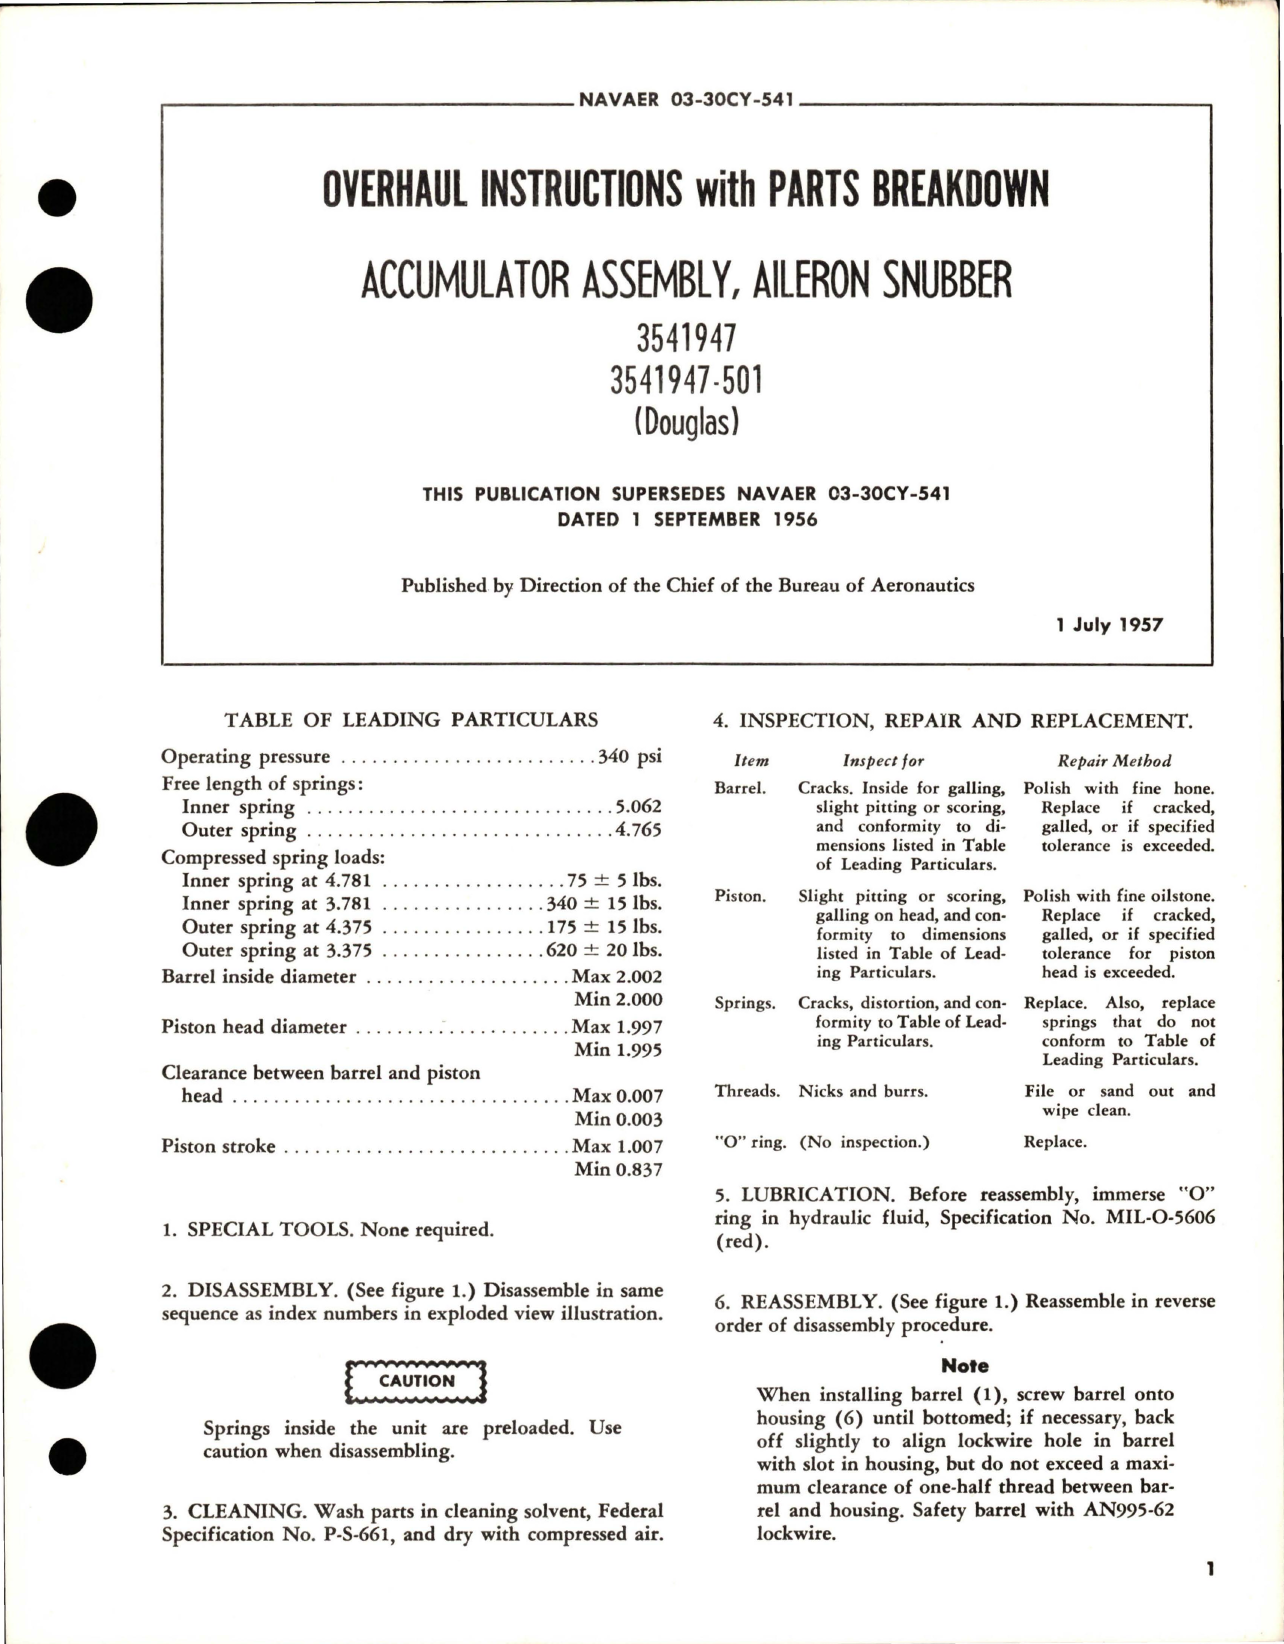 Sample page 1 from AirCorps Library document: Overhaul Instructions with Parts Breakdown for Aileron Snubber Accumulator Assembly - 3541947, 3541947-501